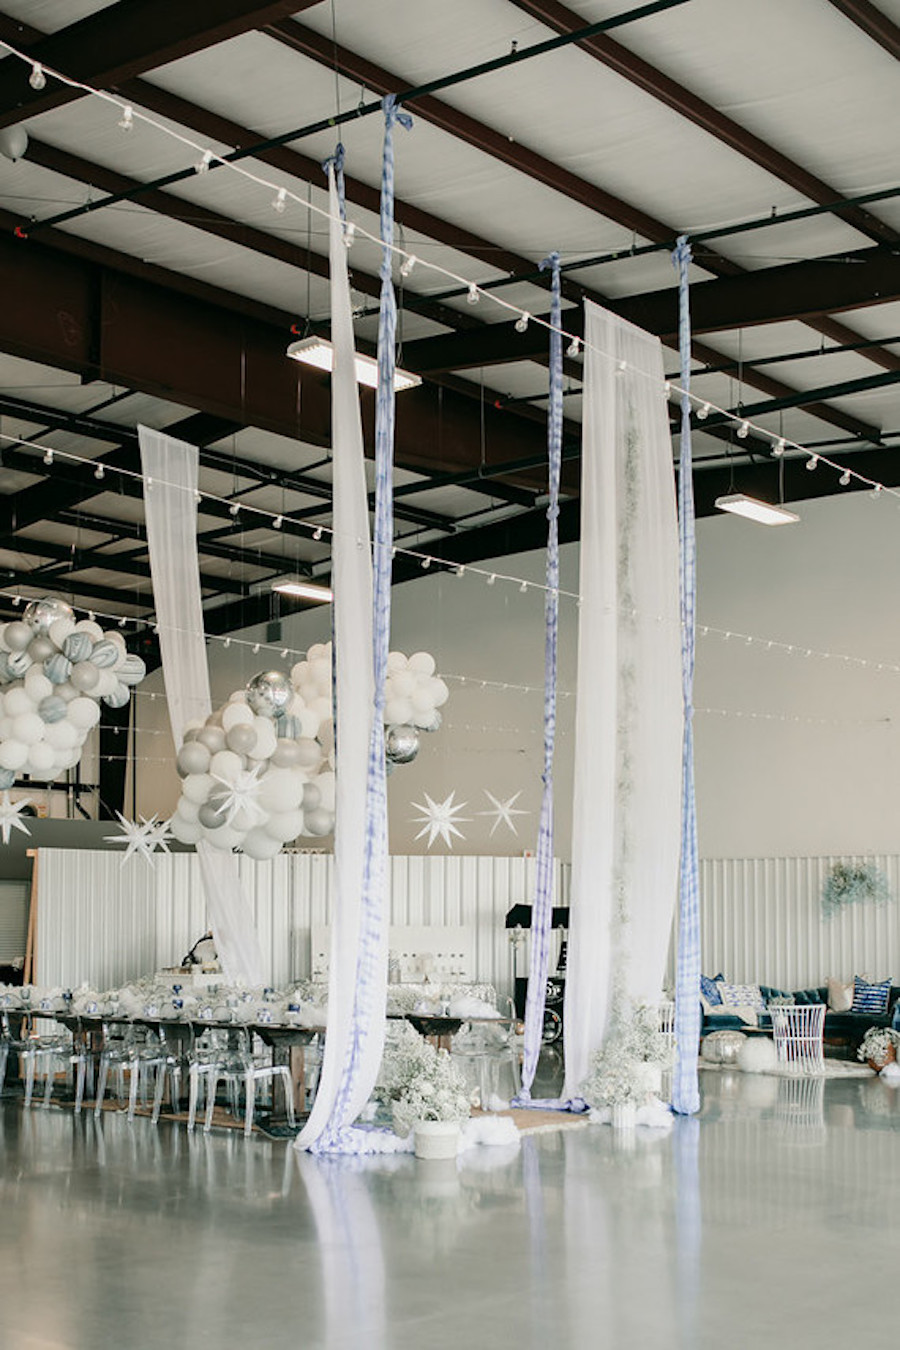 Helicopter Themed Baby Shower at Hangar 21